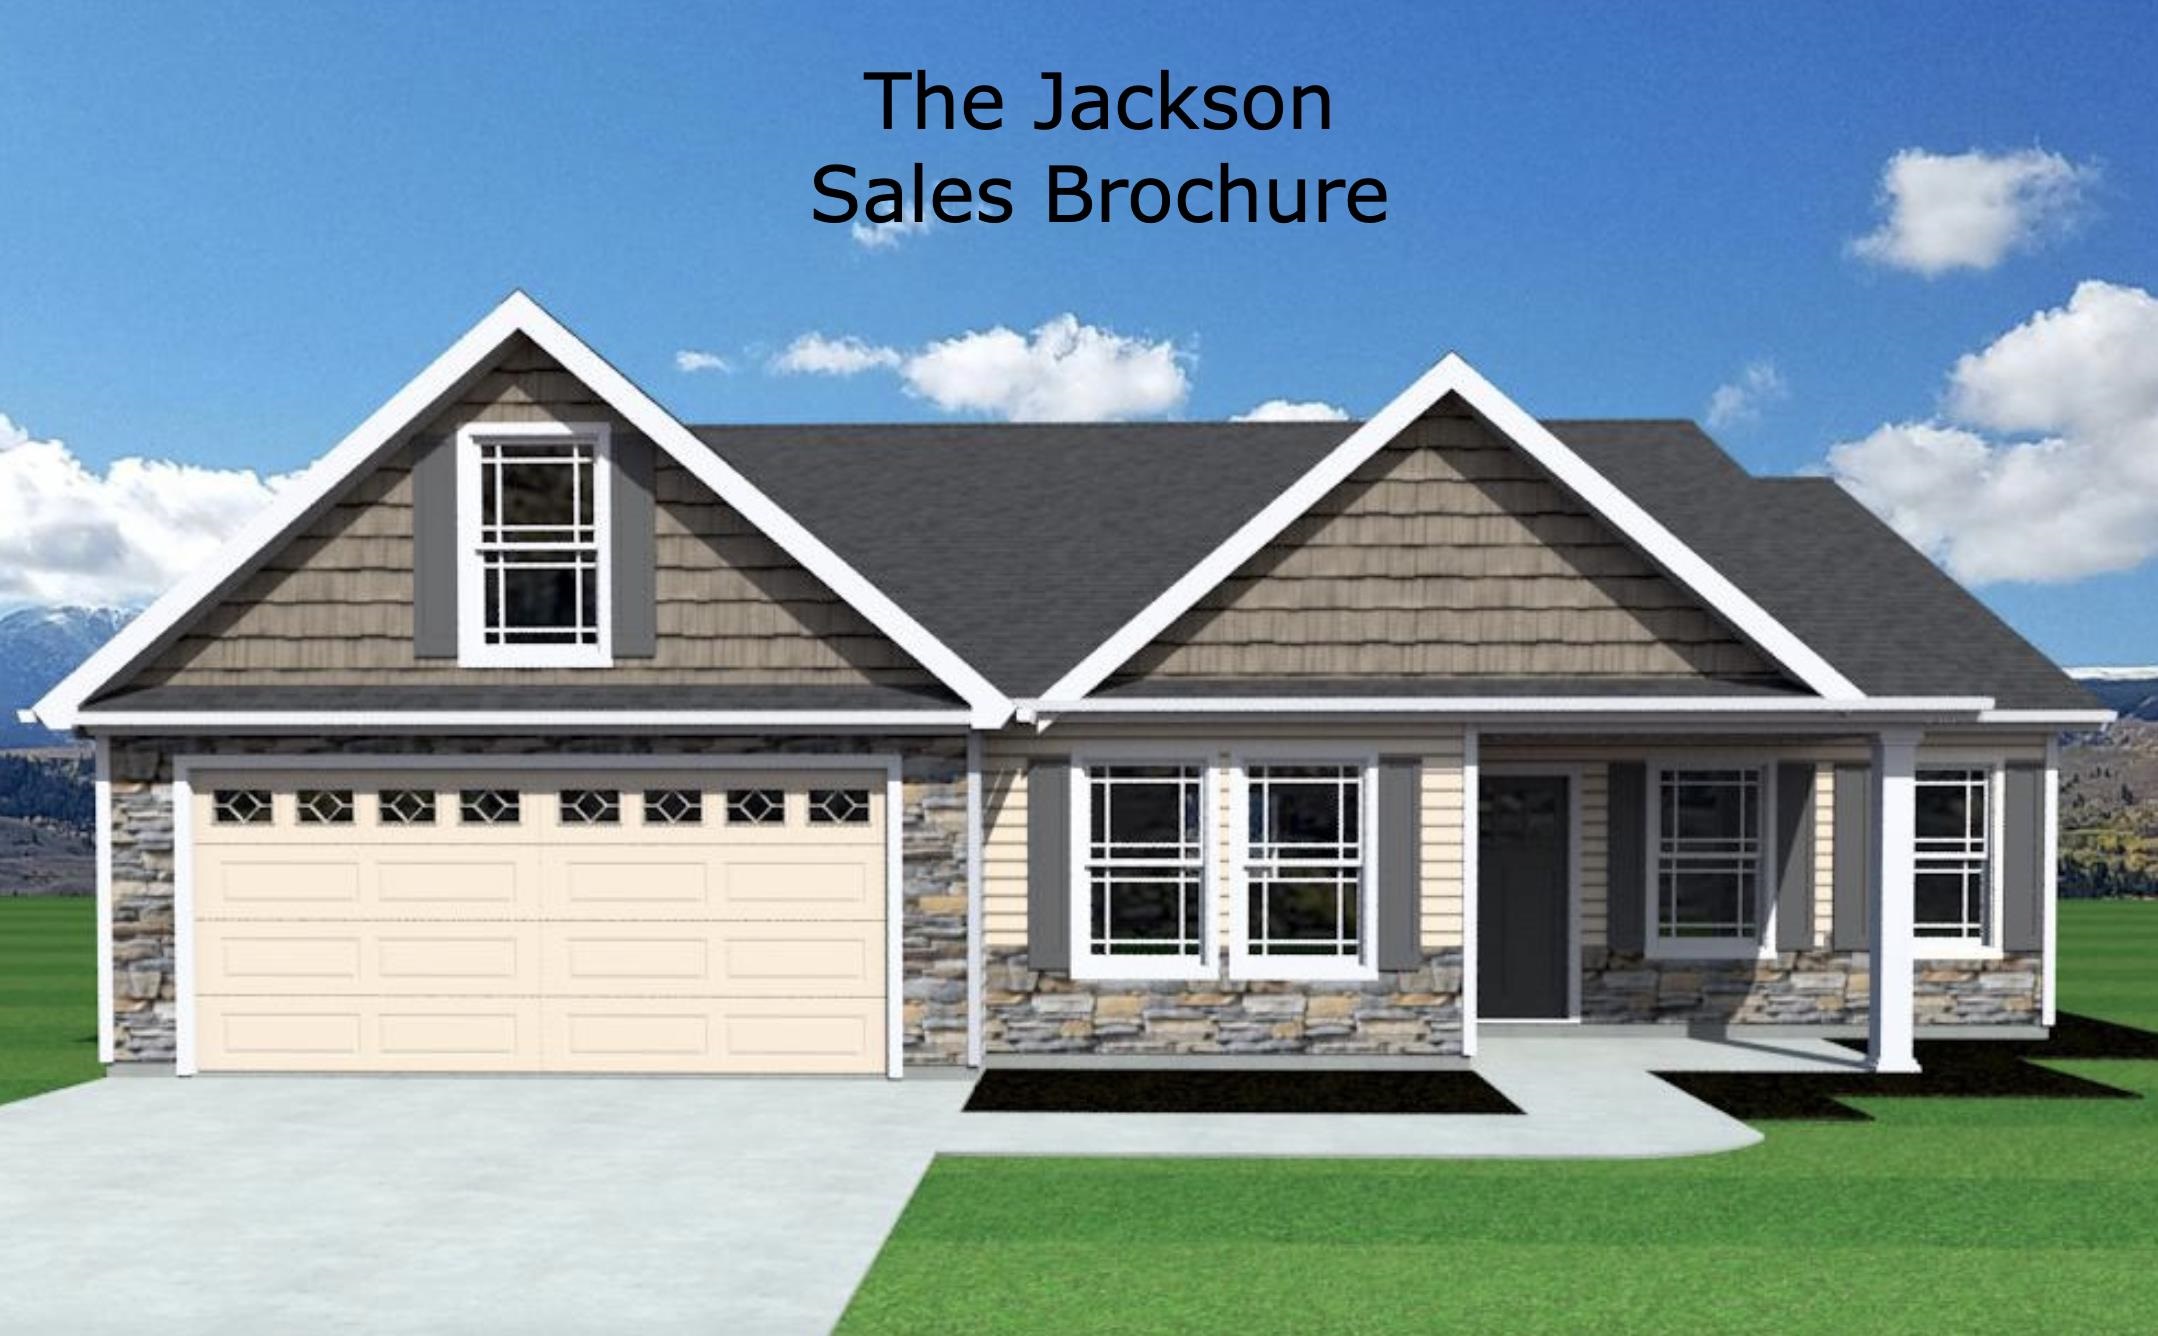 Lot 17 - The Jackson plan offers a beautiful, modern layout. Split floor plan. Kitchen open to living area.  Home complete with the trademark chair rail, crown molding, and rope lighting. Lot 17